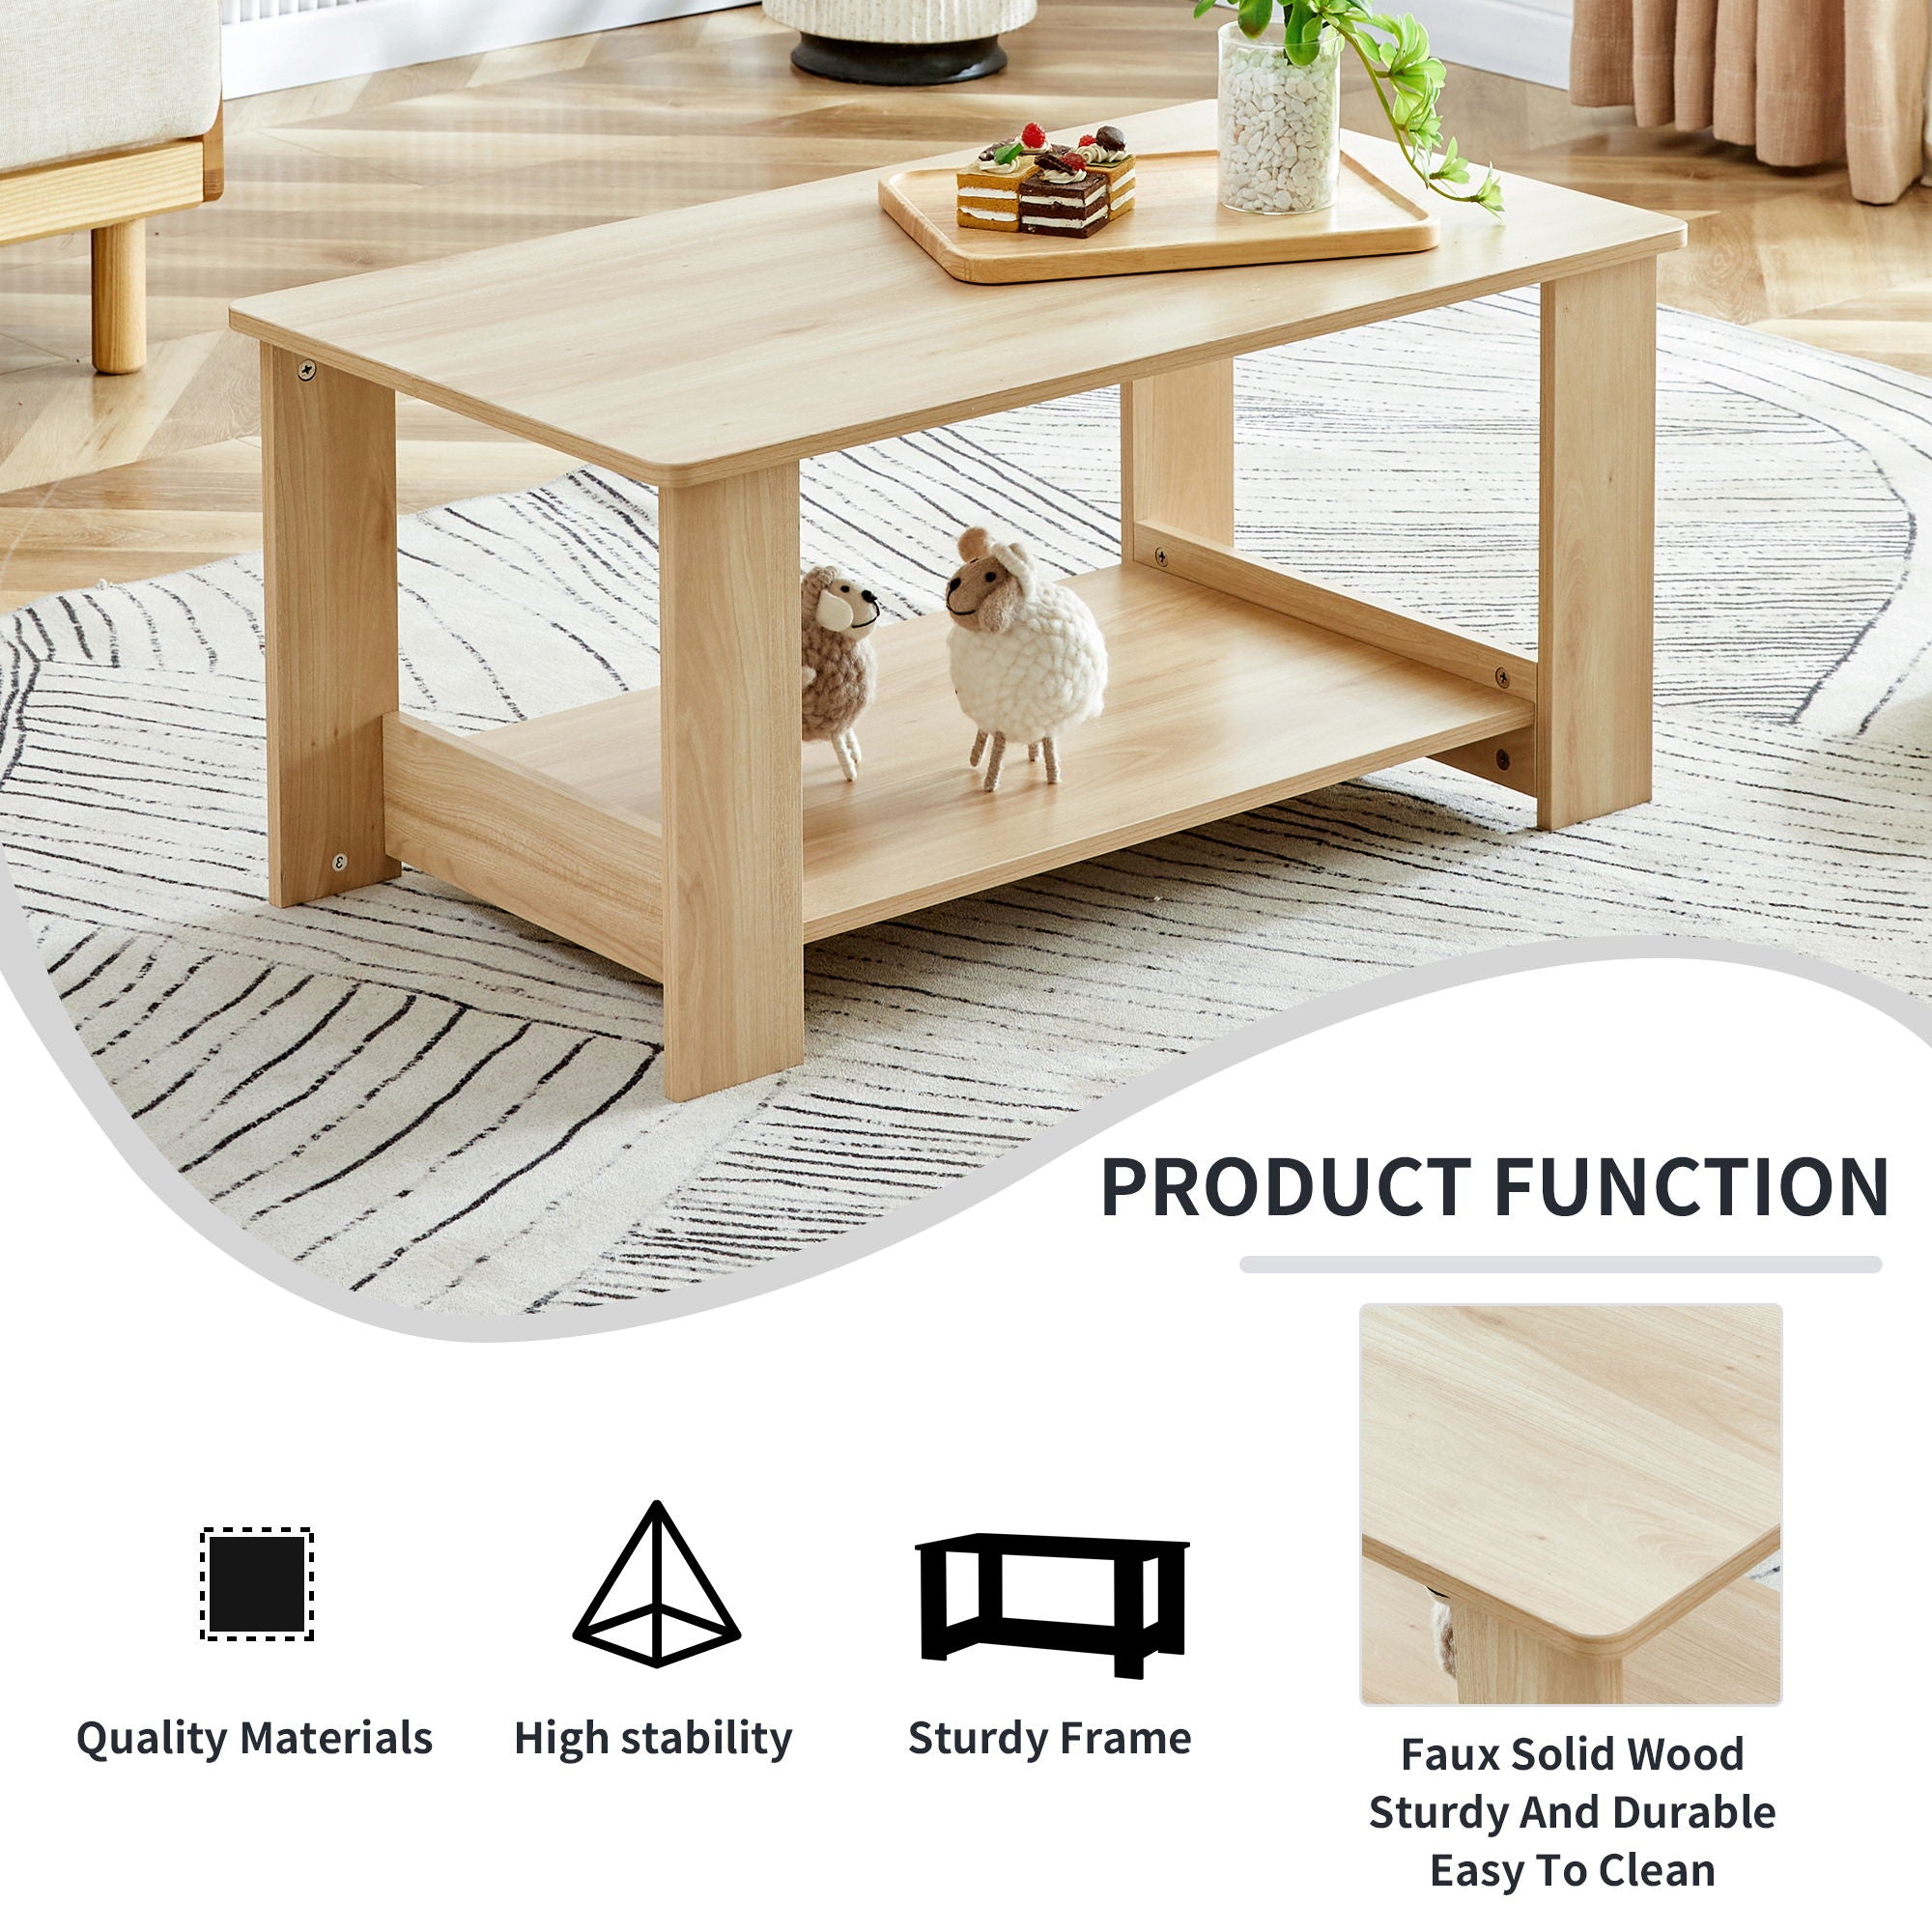 Modern Minimalist Log Colored Double Layered Rectangular Coffee Table, Tea Table.Mdf Material Is More Durable, Suitable For Living Room, Bedroom, And Study Room